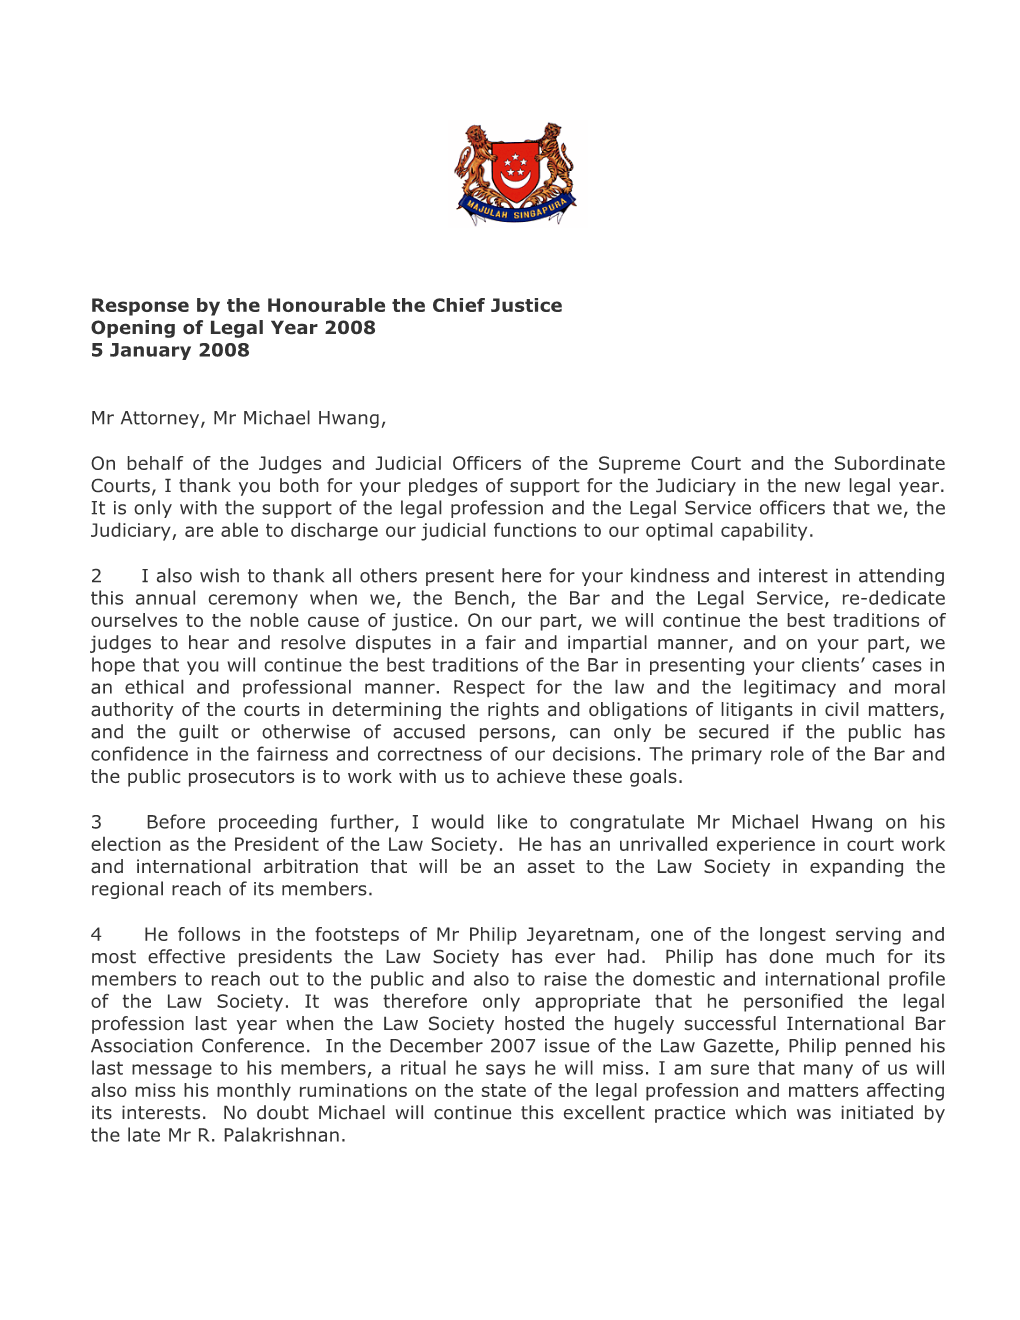 Response by the Honourable the Chief Justice Opening of Legal Year 2008 5 January 2008